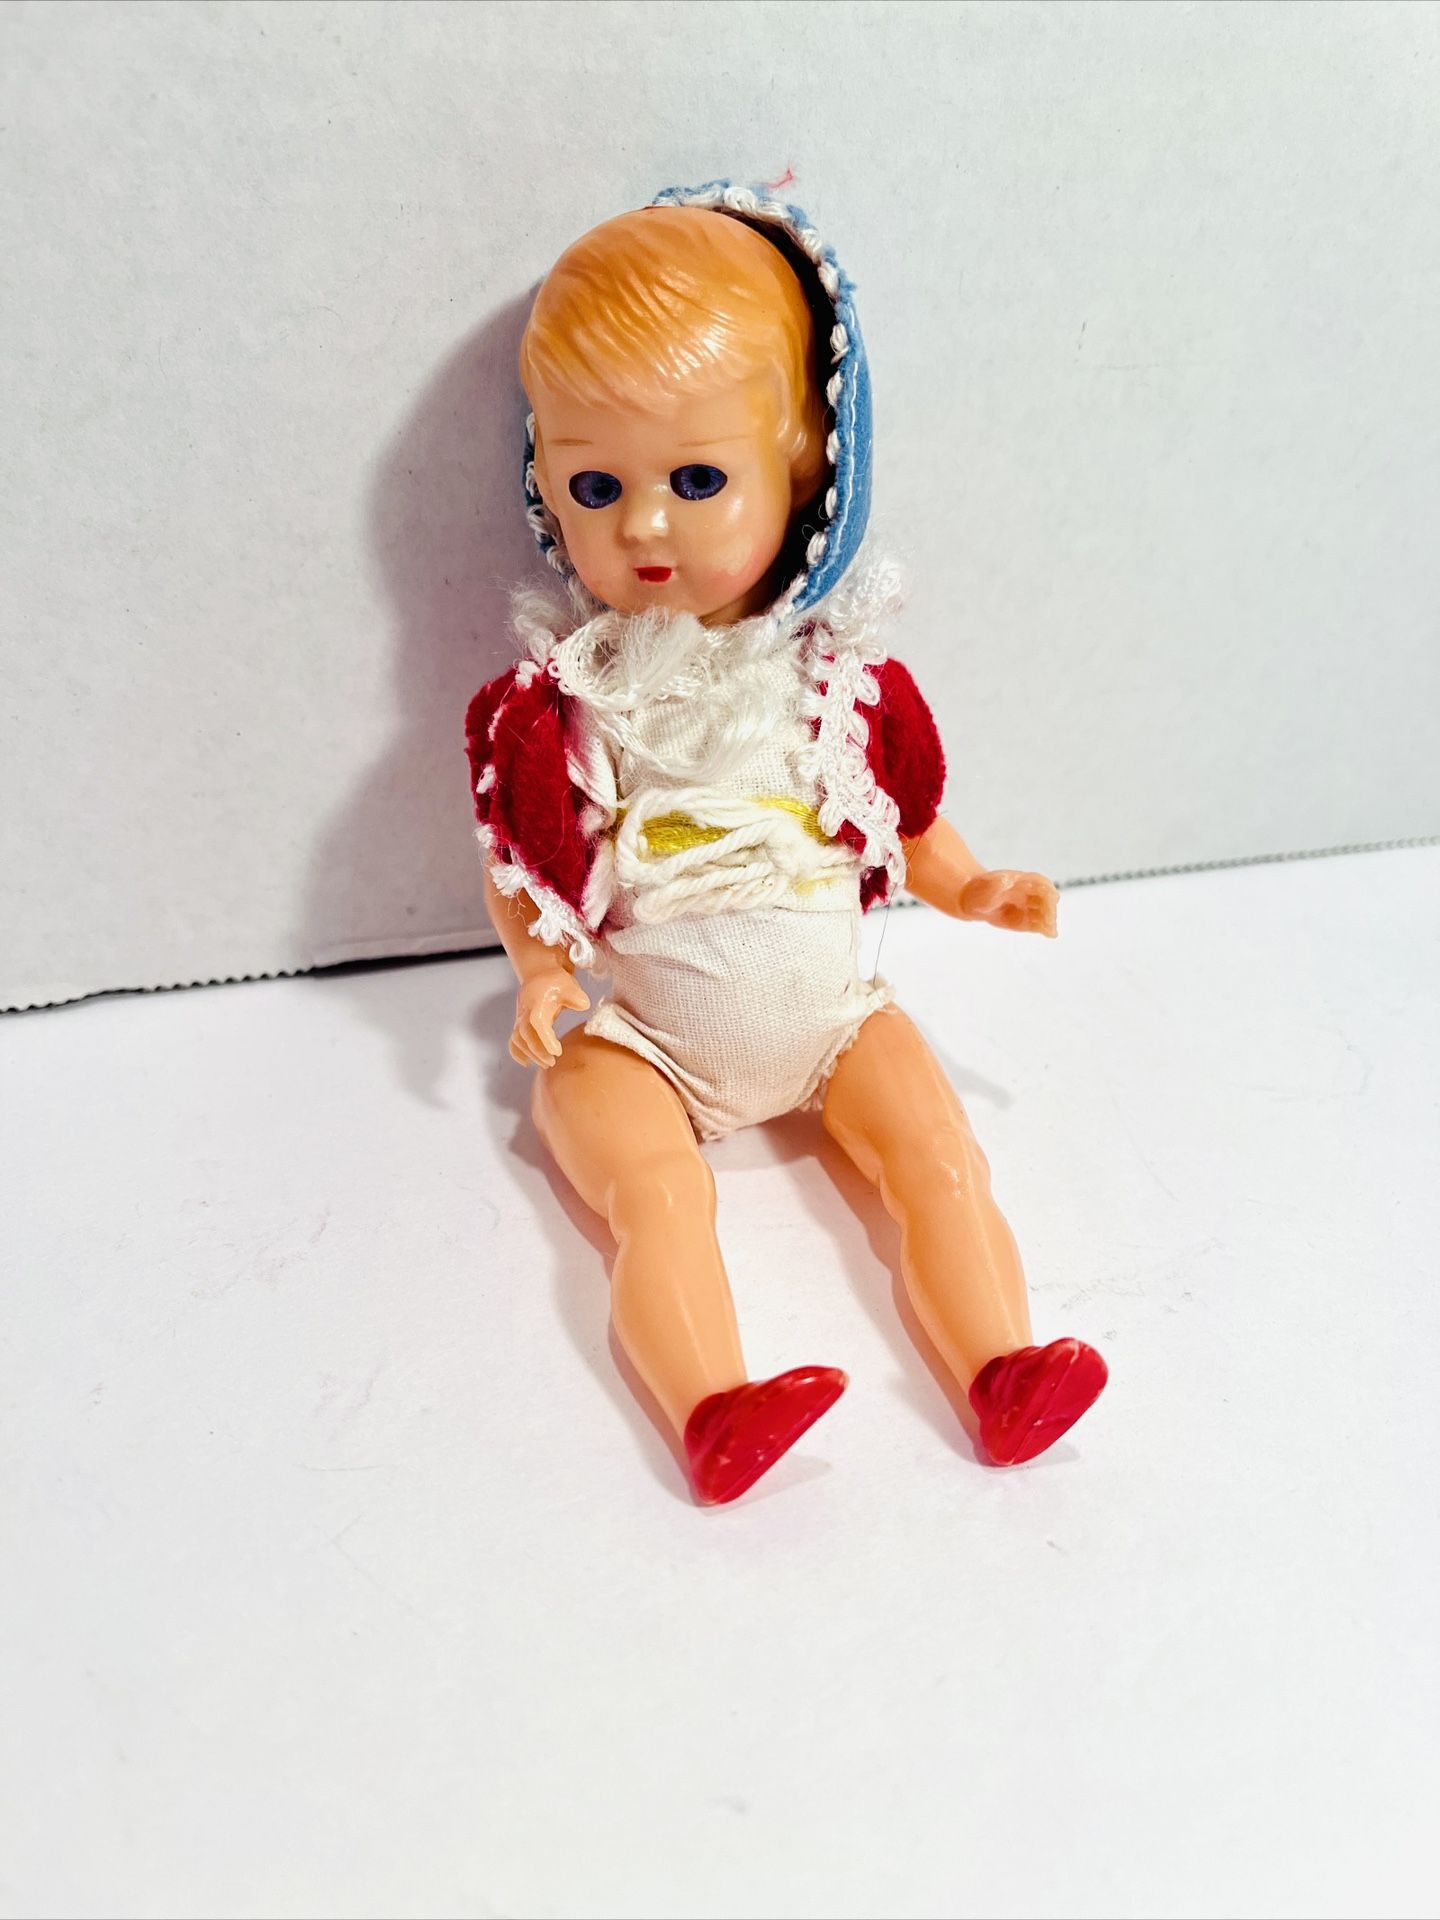 Celluloid Plastic Child Girl Vintage Jointed Doll - 5.5 inches